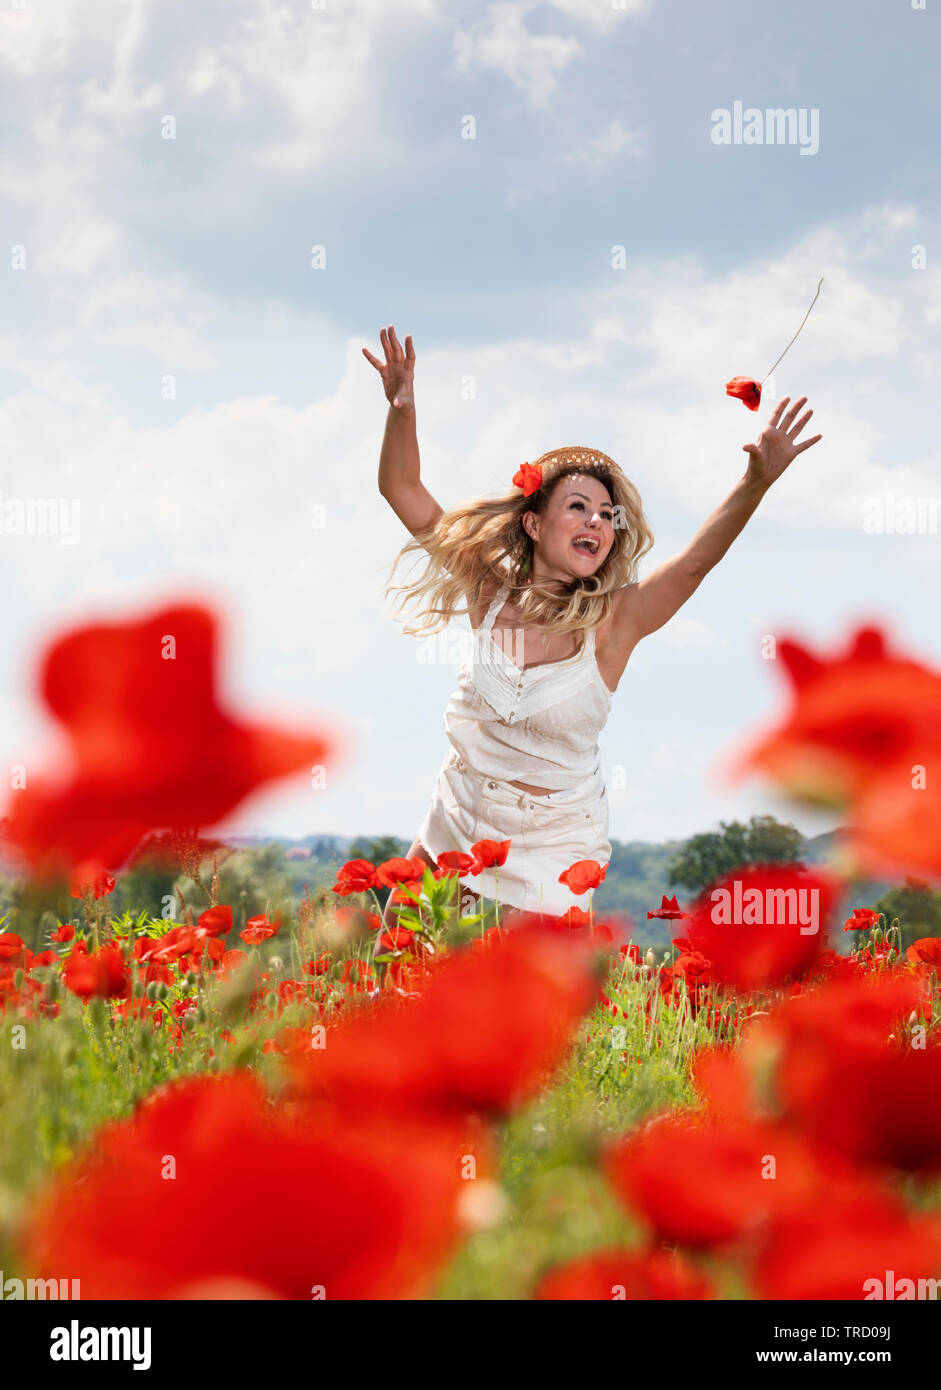 Young woman catch poppy flower in the air Stock Photo